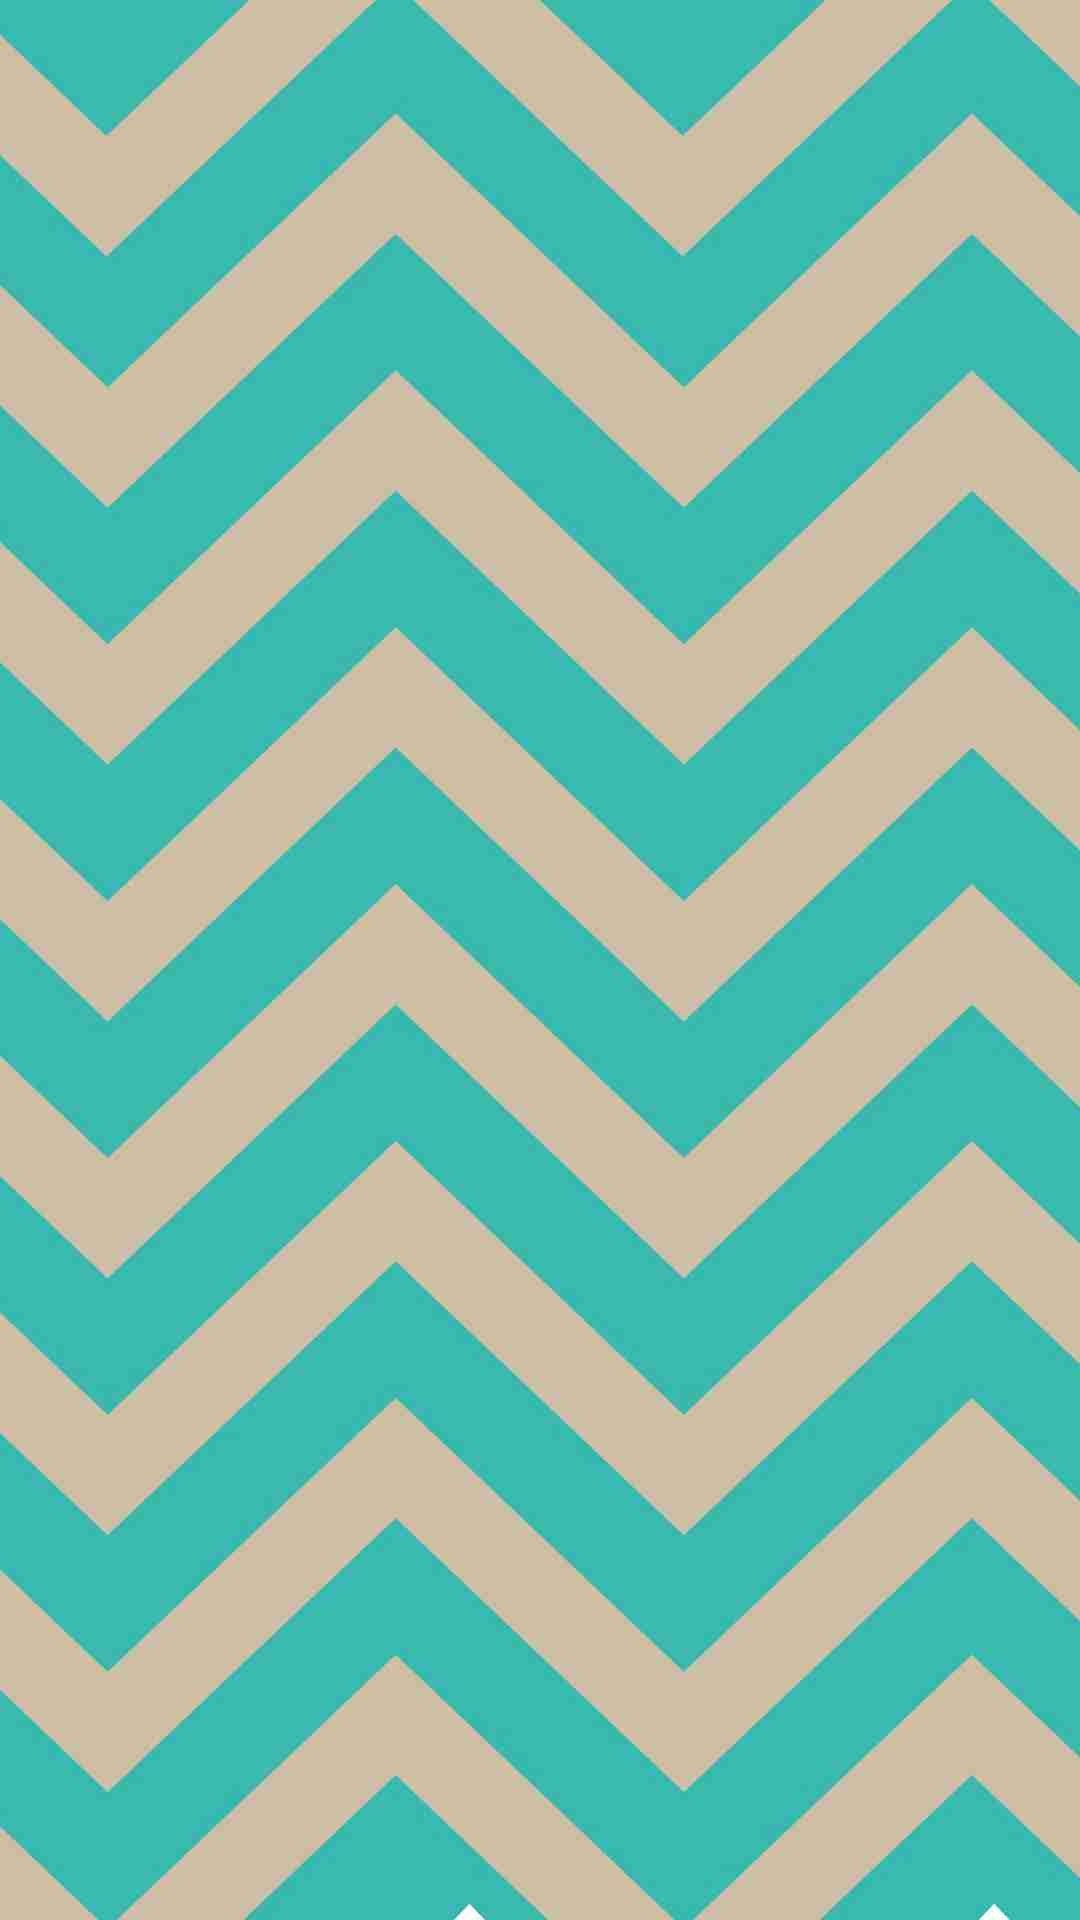 1080x1920 Turquoise Blue and Ivory Chevron iPhone 6 Plus Wallpaper - Classic Colors,  Zigzag Pattern